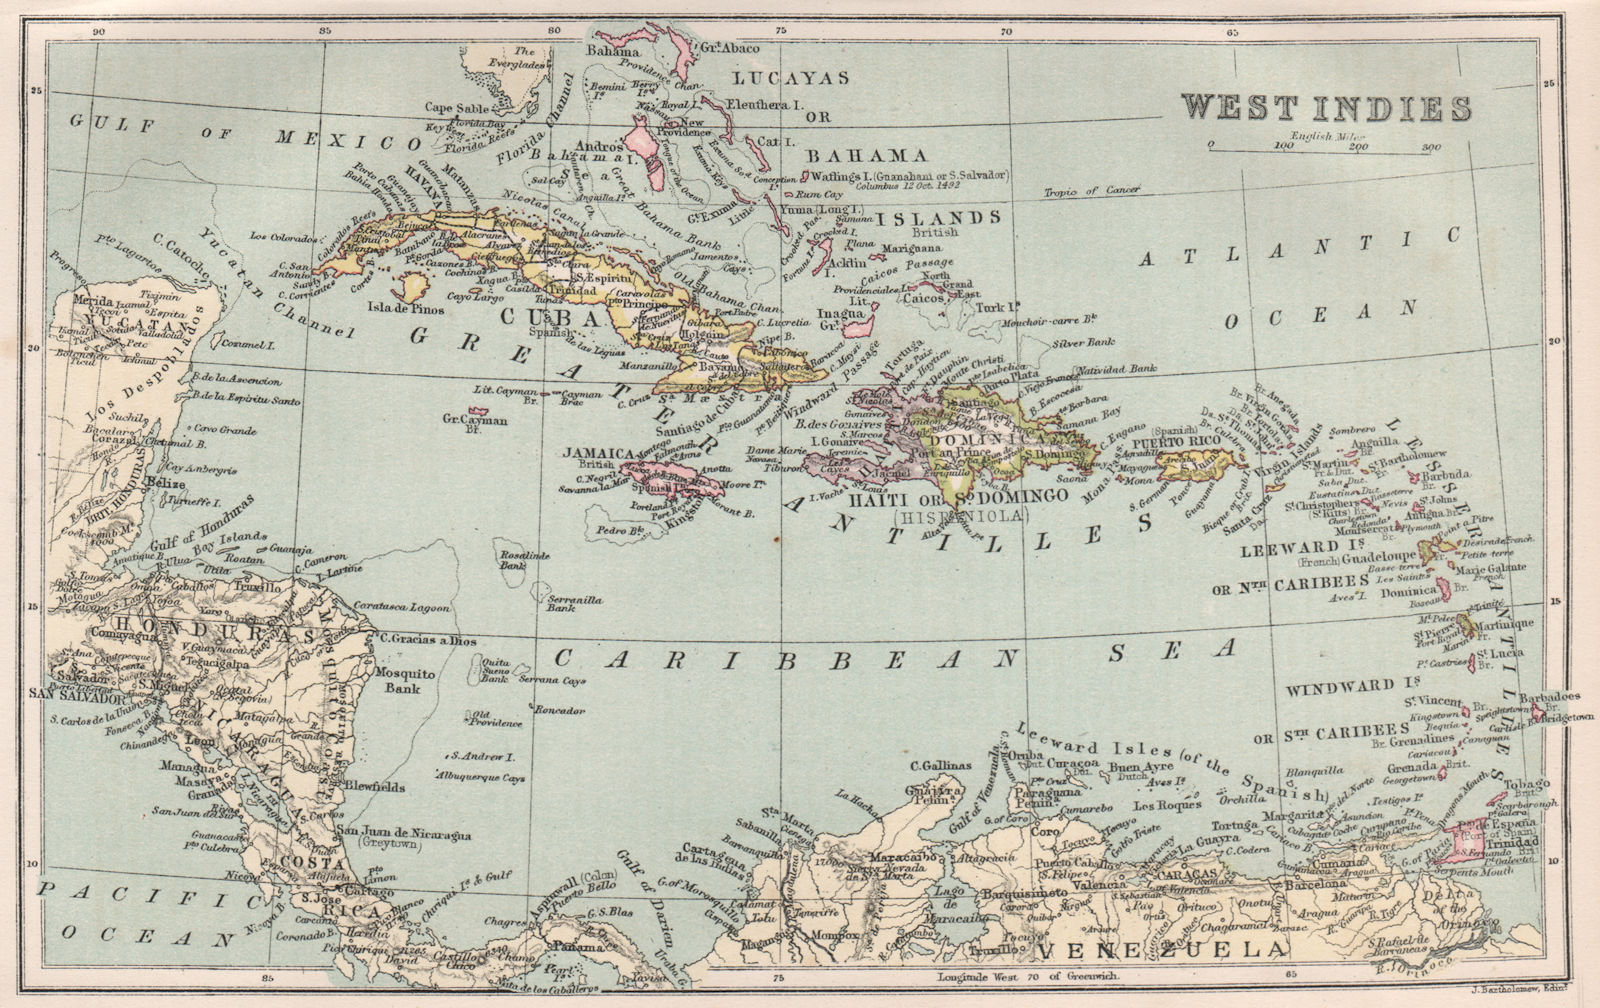 Associate Product West Indies. Haiti/Dominican Republic borders differ. BARTHOLOMEW 1886 old map